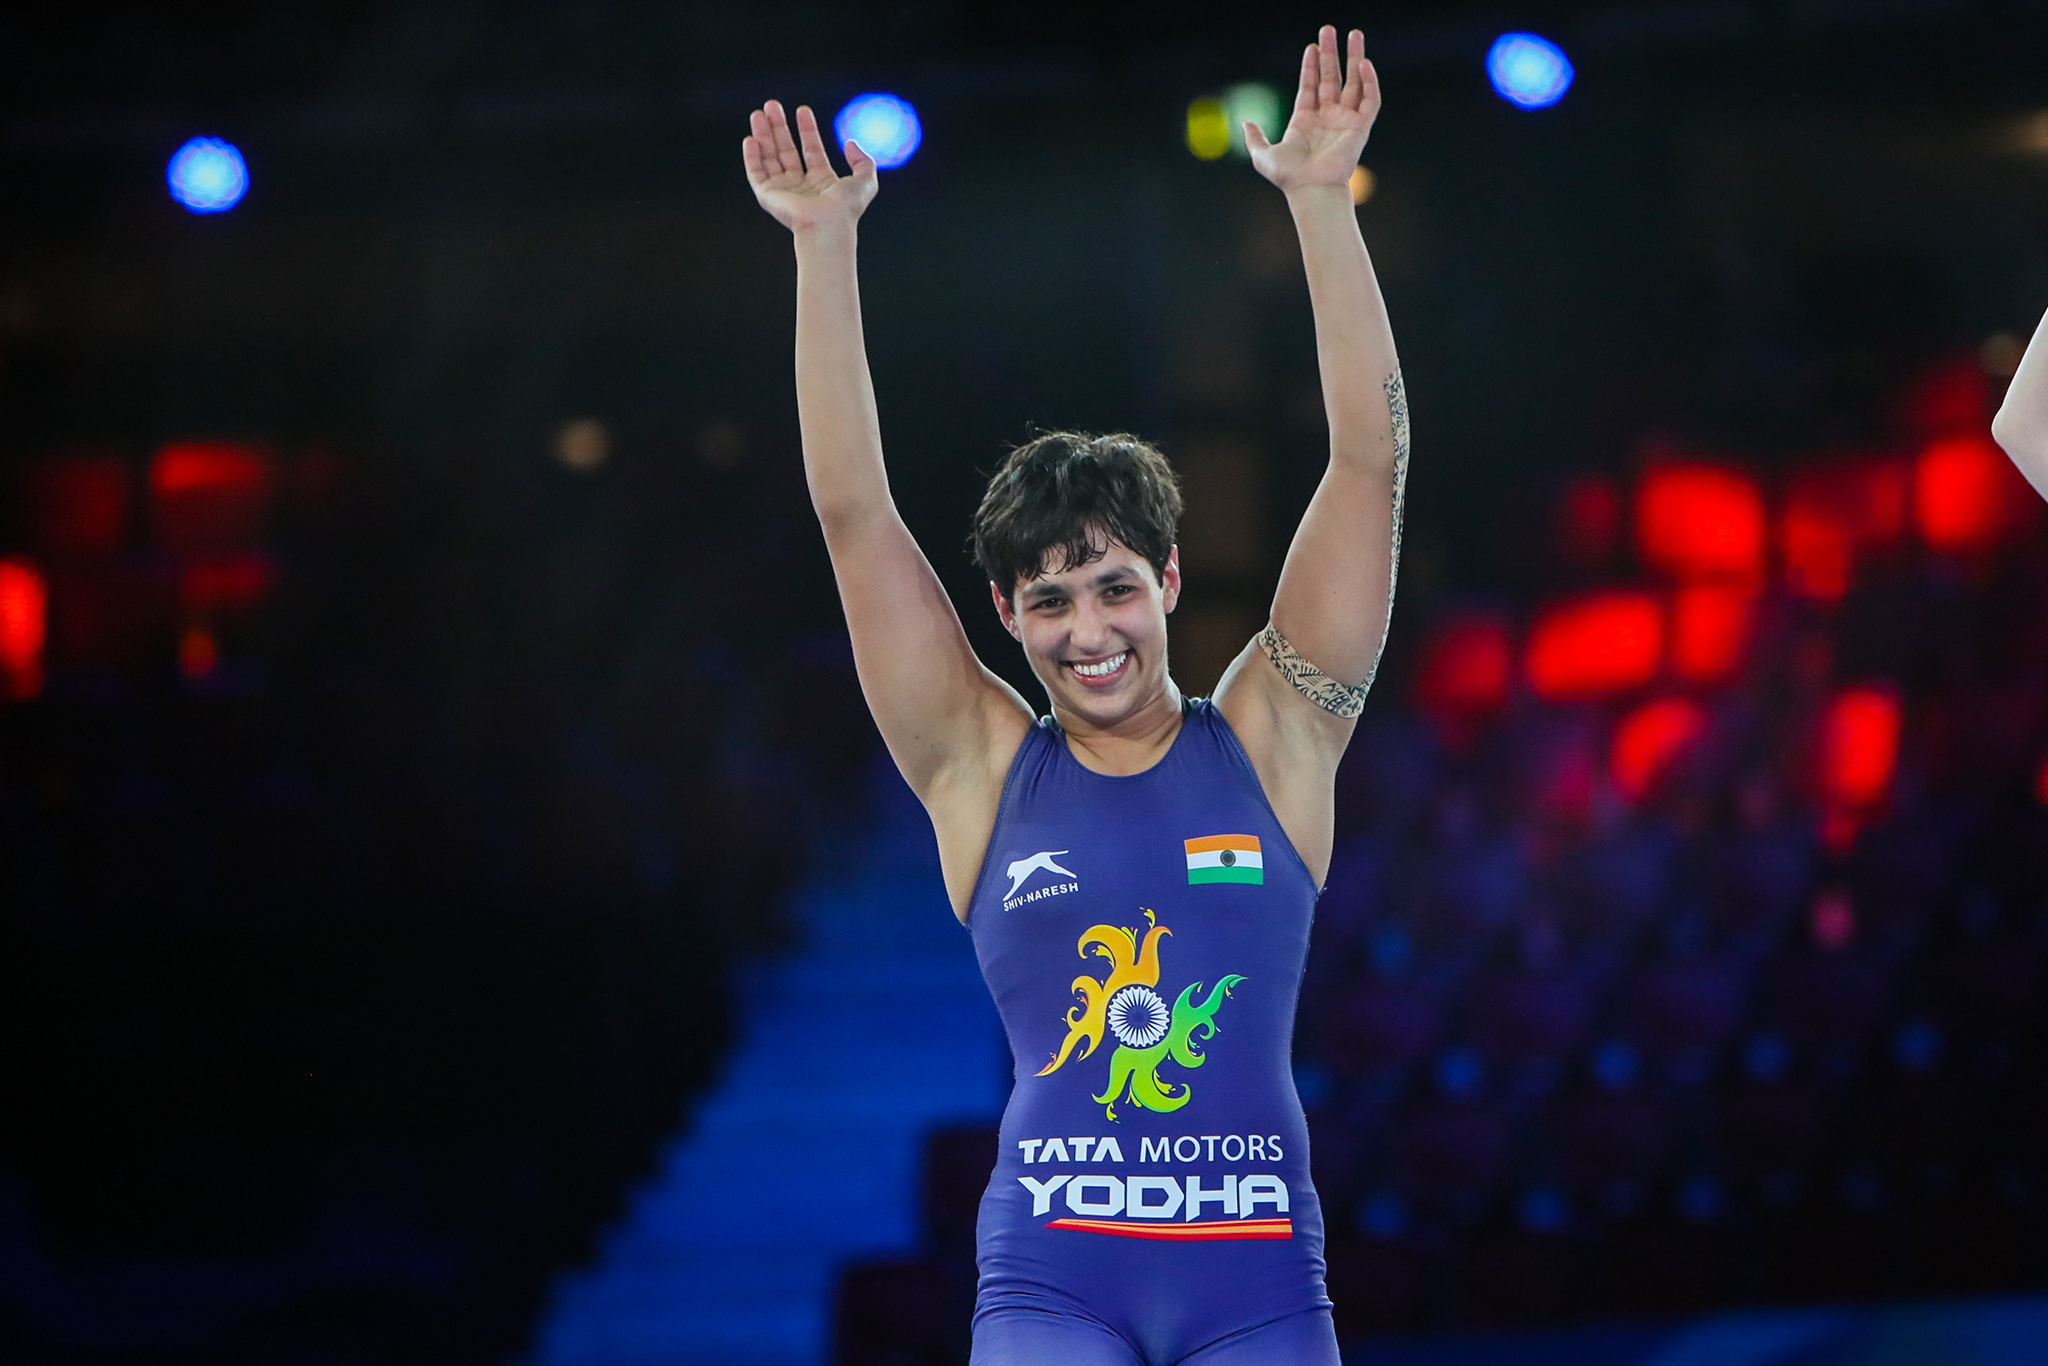 Anshu Malik becomes the first Indian Woman to reach the World Championship finals │ Wrestling World Championship │ Wrestling │ Sportz Point